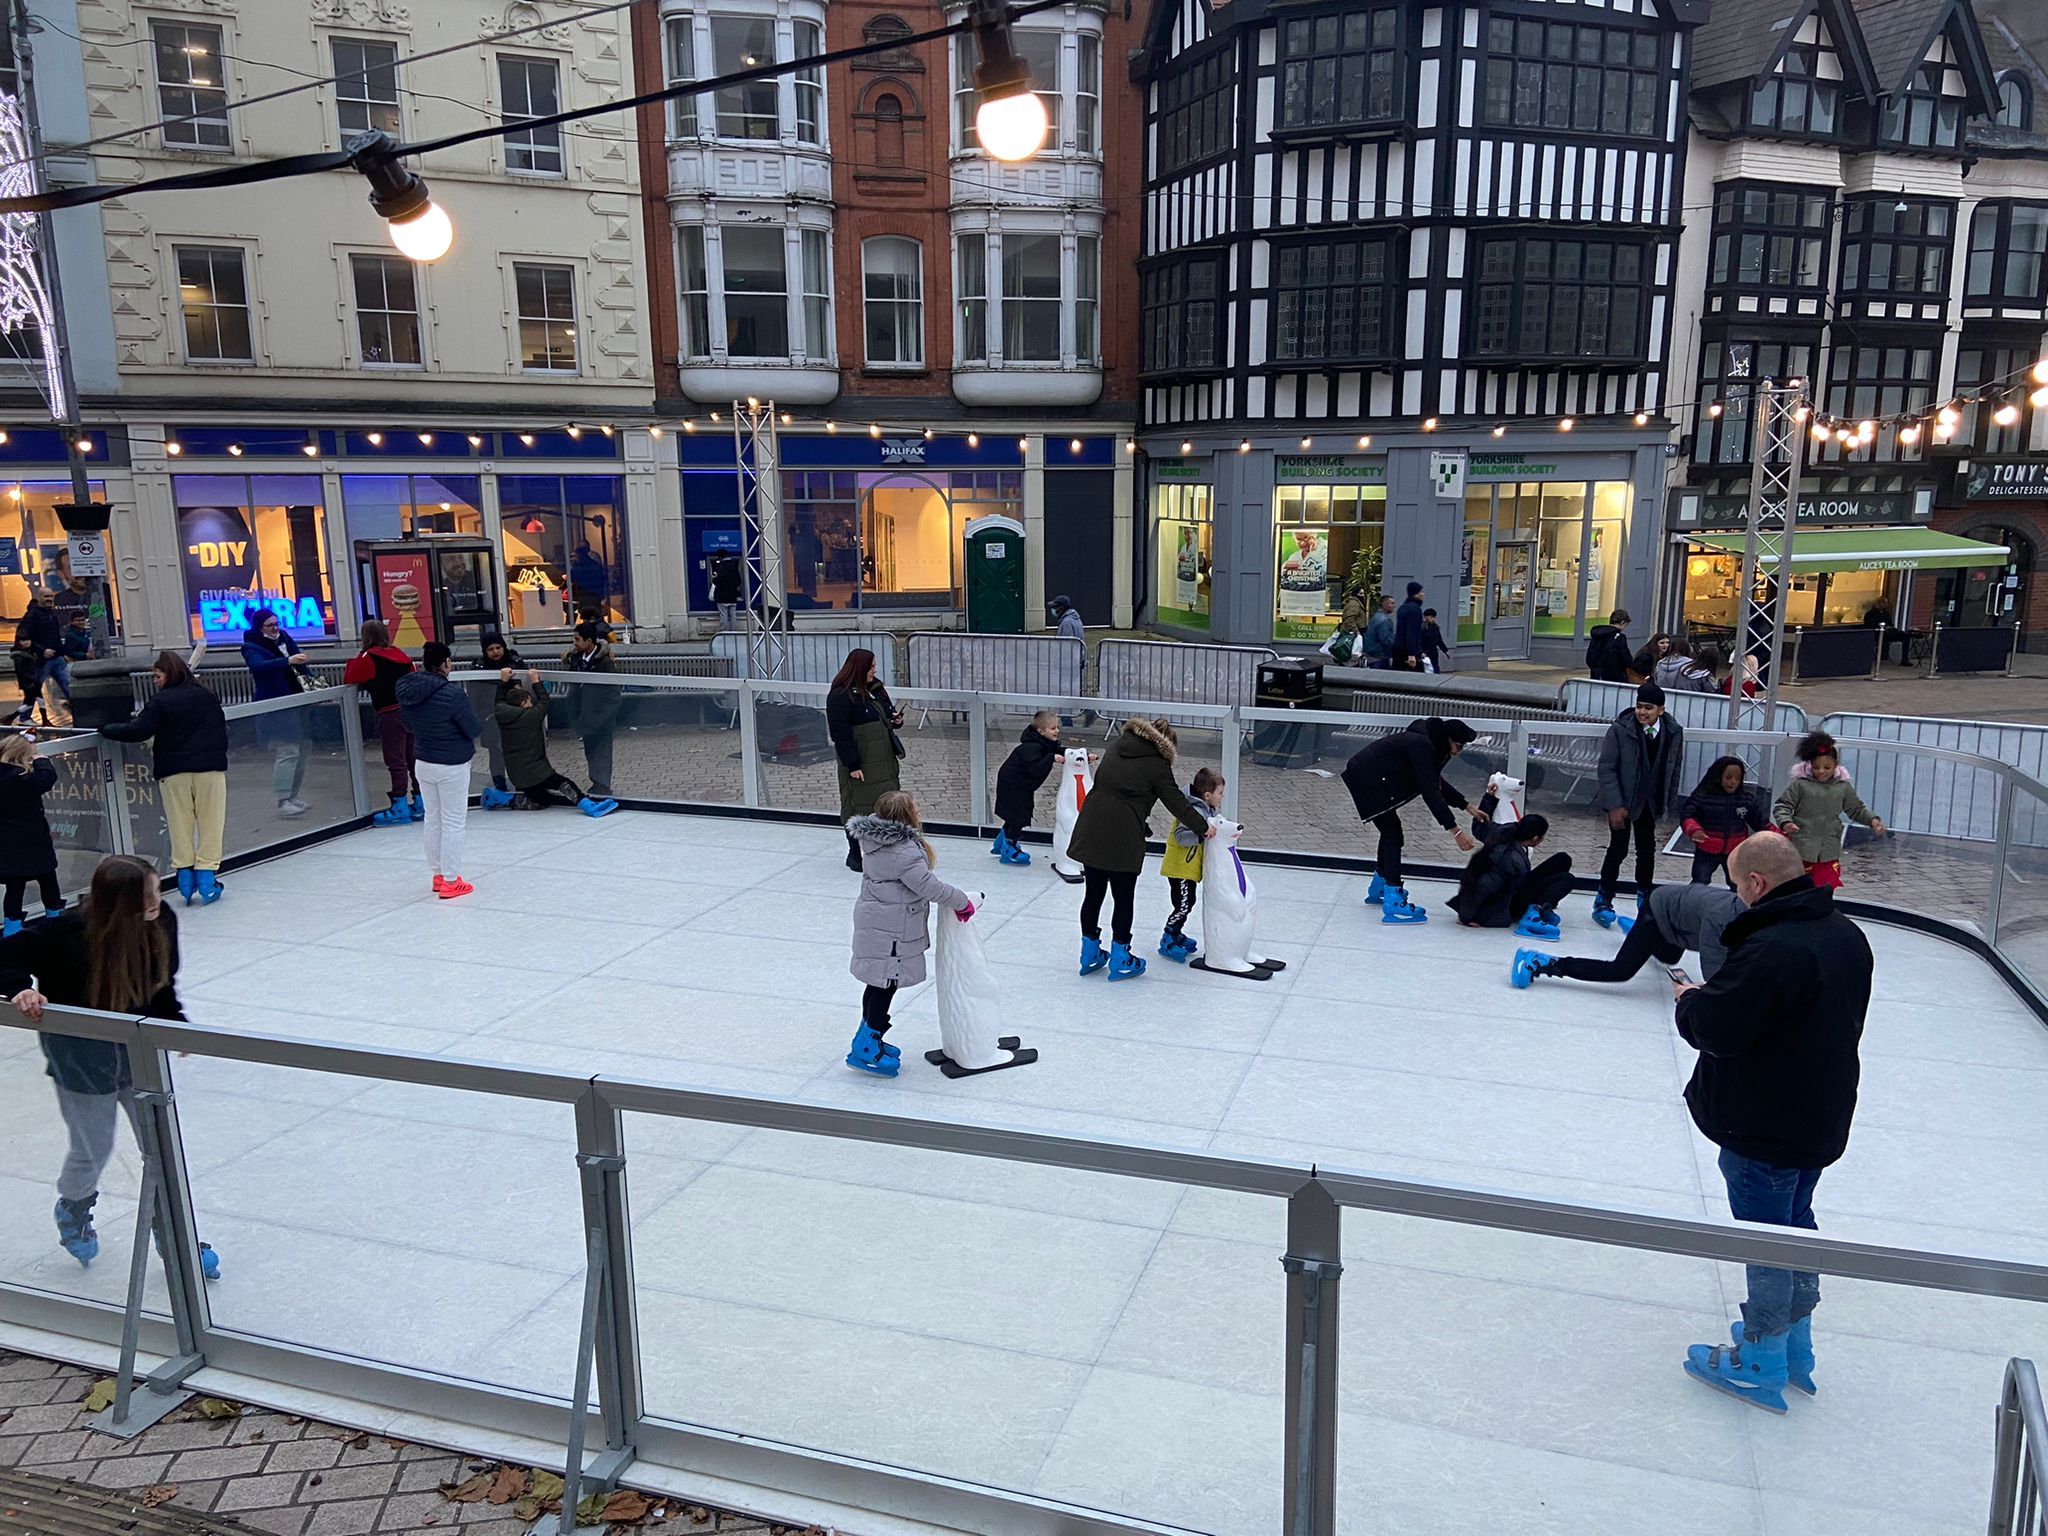 Group bookings invited when skating rink opens in town centre